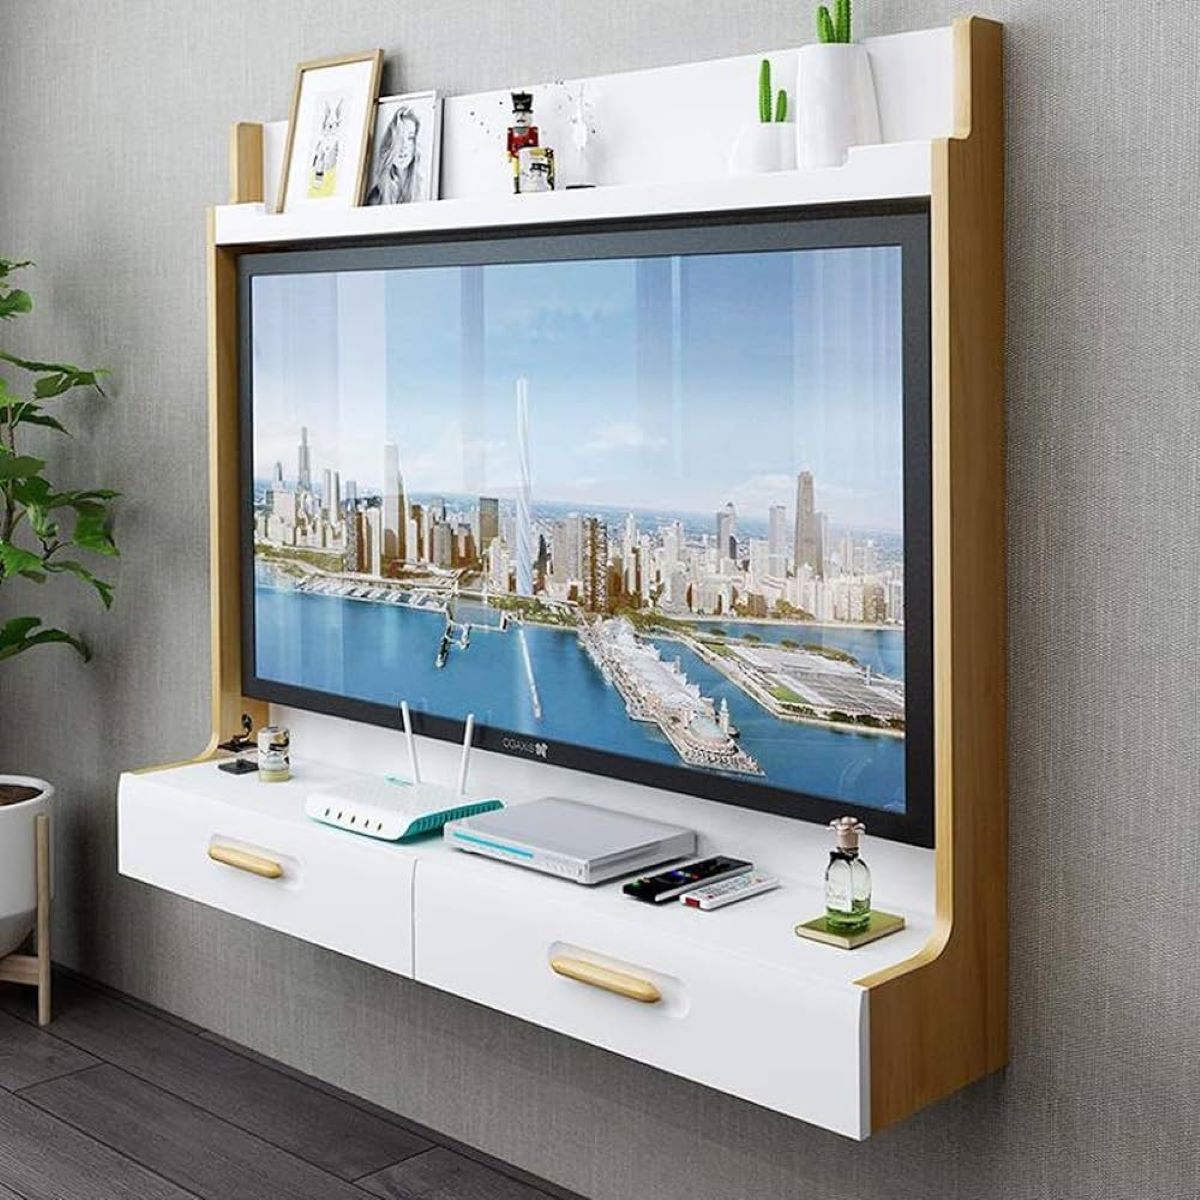 What Size TV Stand Will Fit A 50-Inch TV